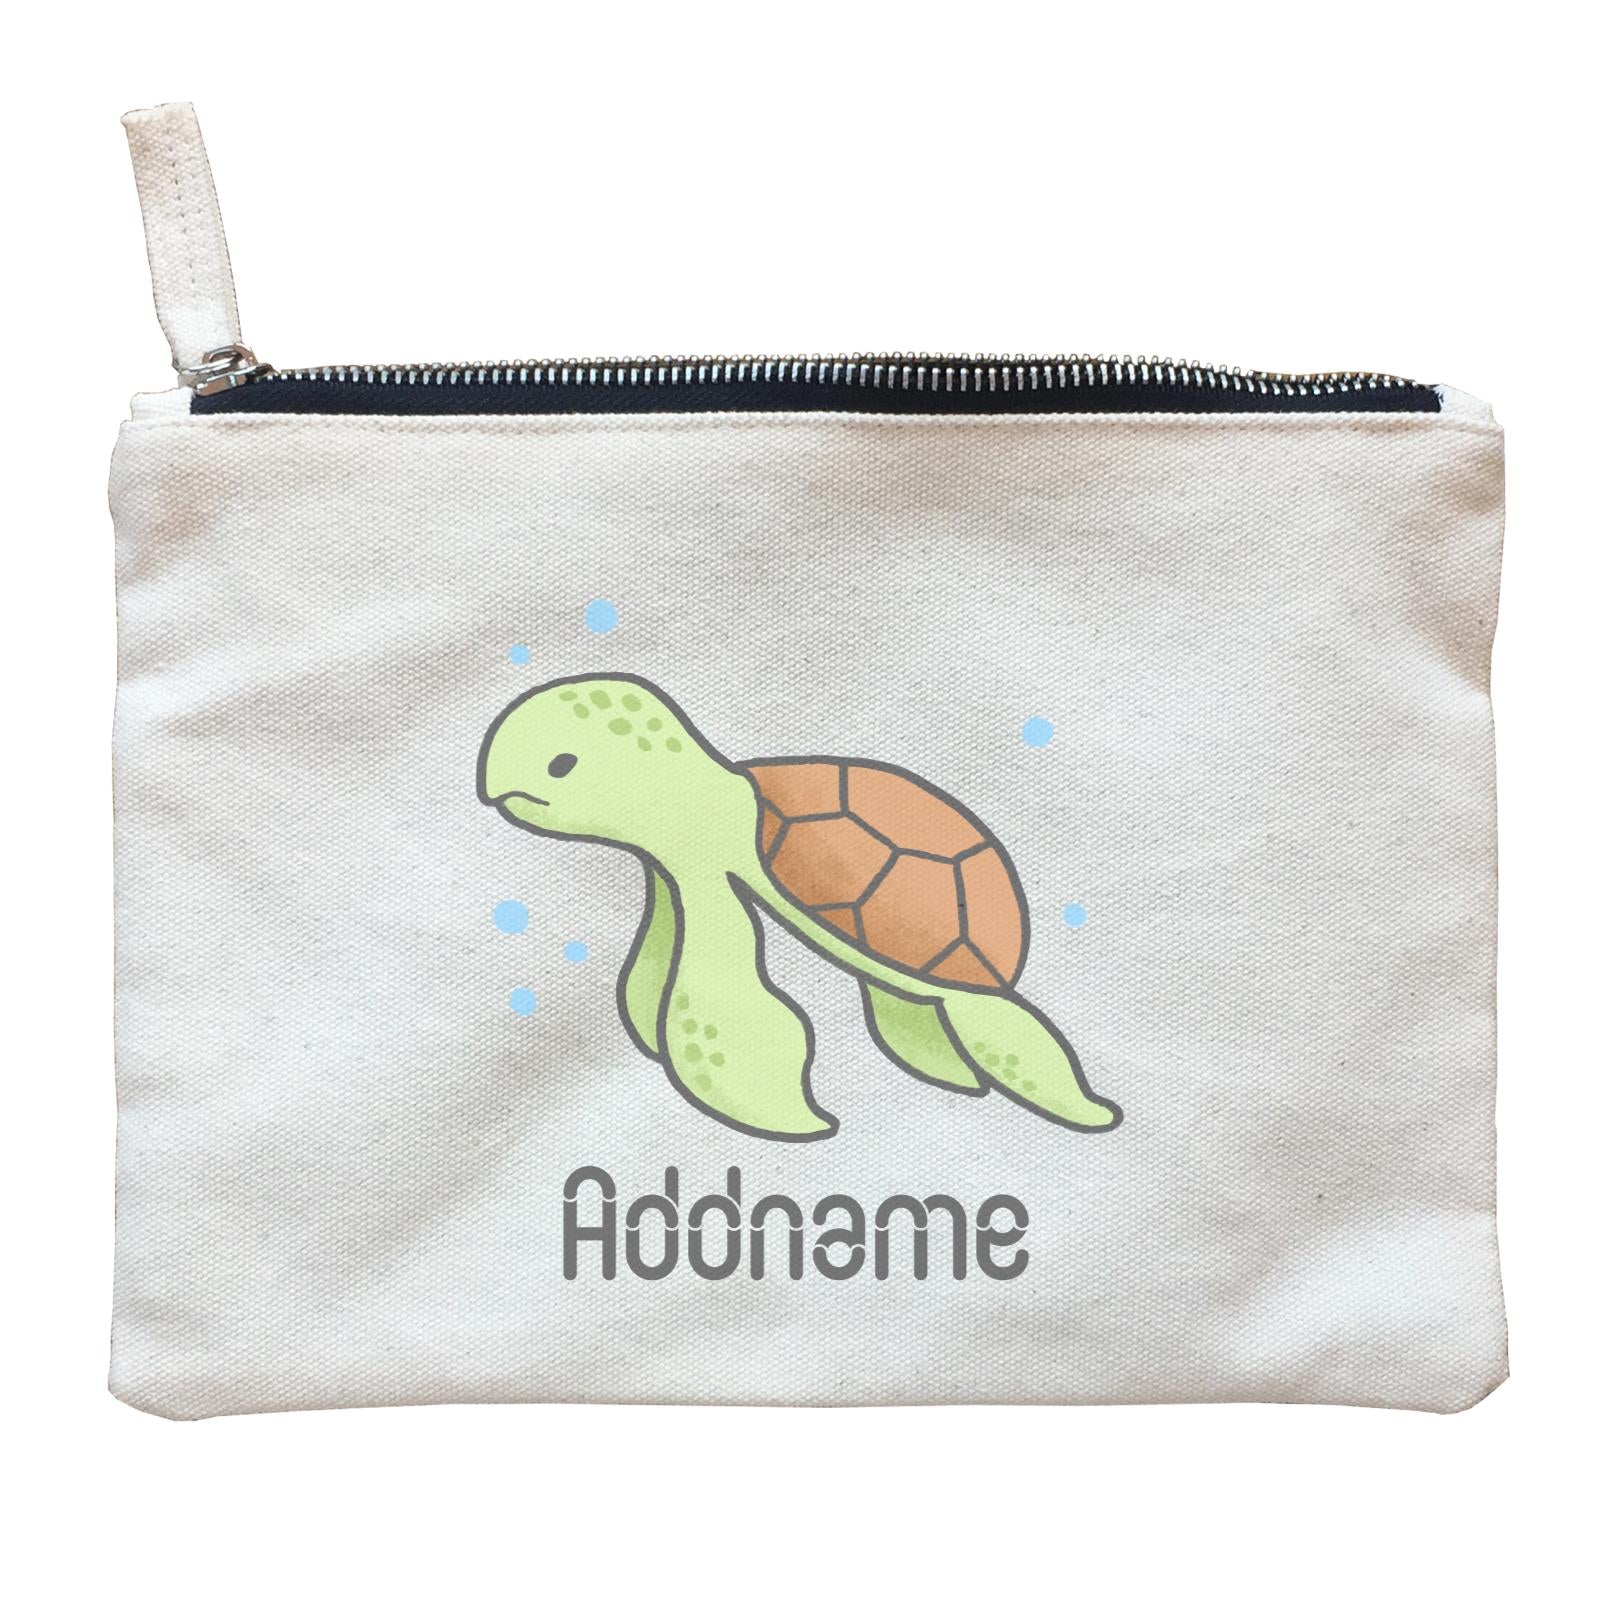 Cute Hand Drawn Style Turtle Addname Zipper Pouch